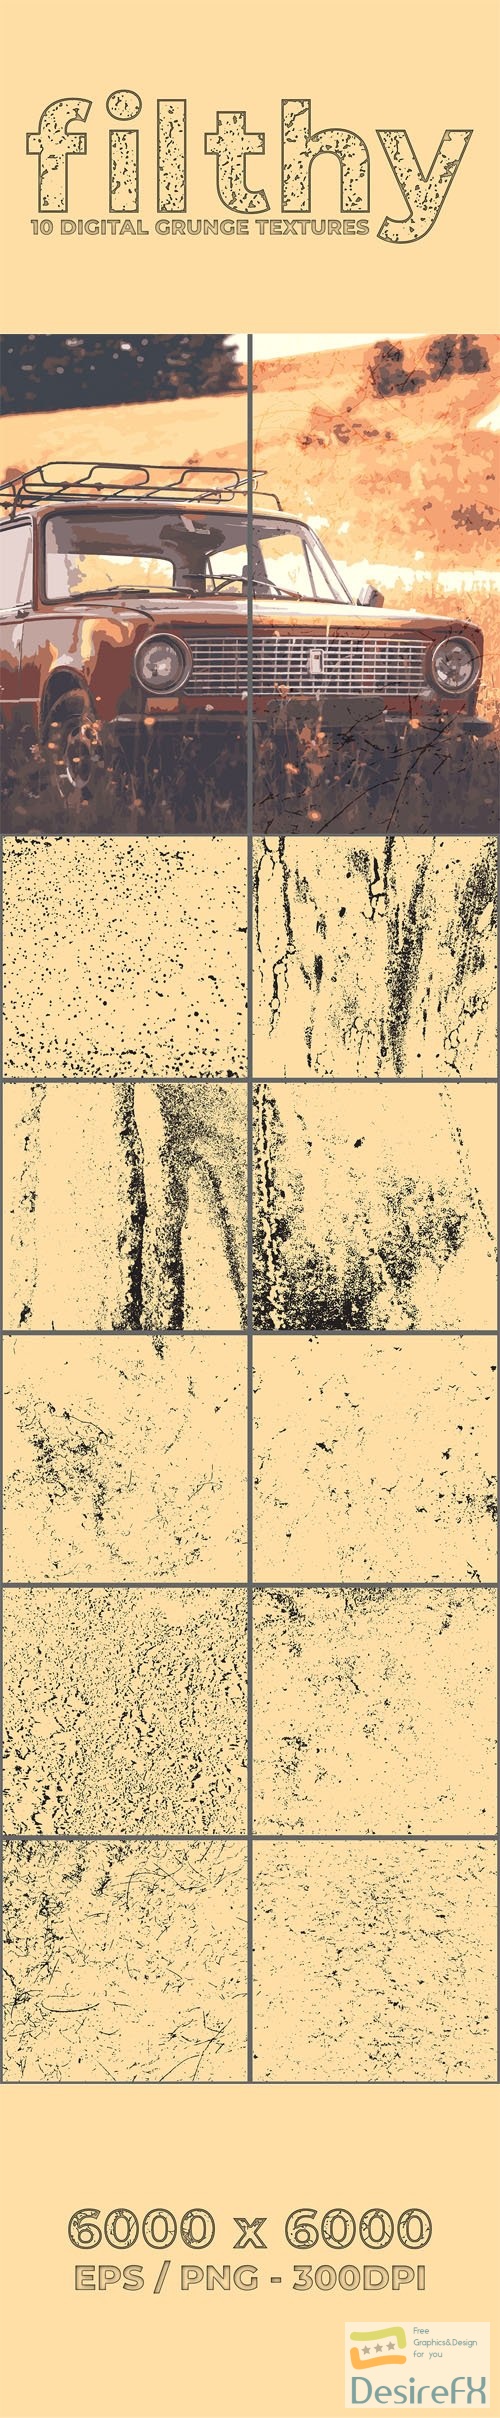 Filthy - 10 Grunge Textures EPS/PNG